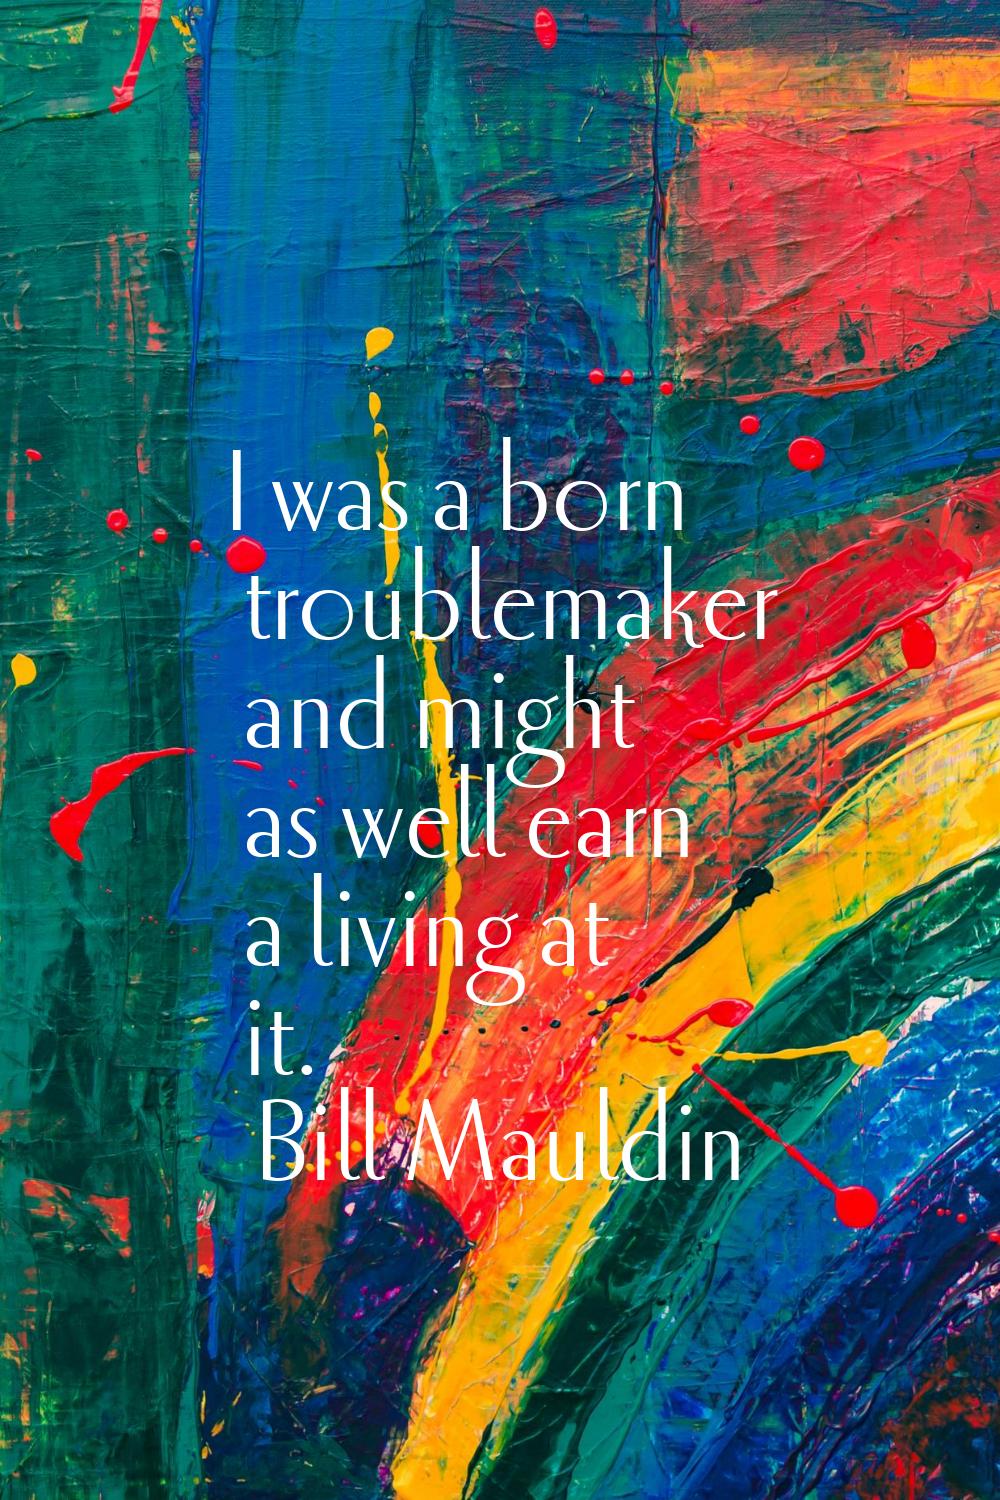 I was a born troublemaker and might as well earn a living at it.